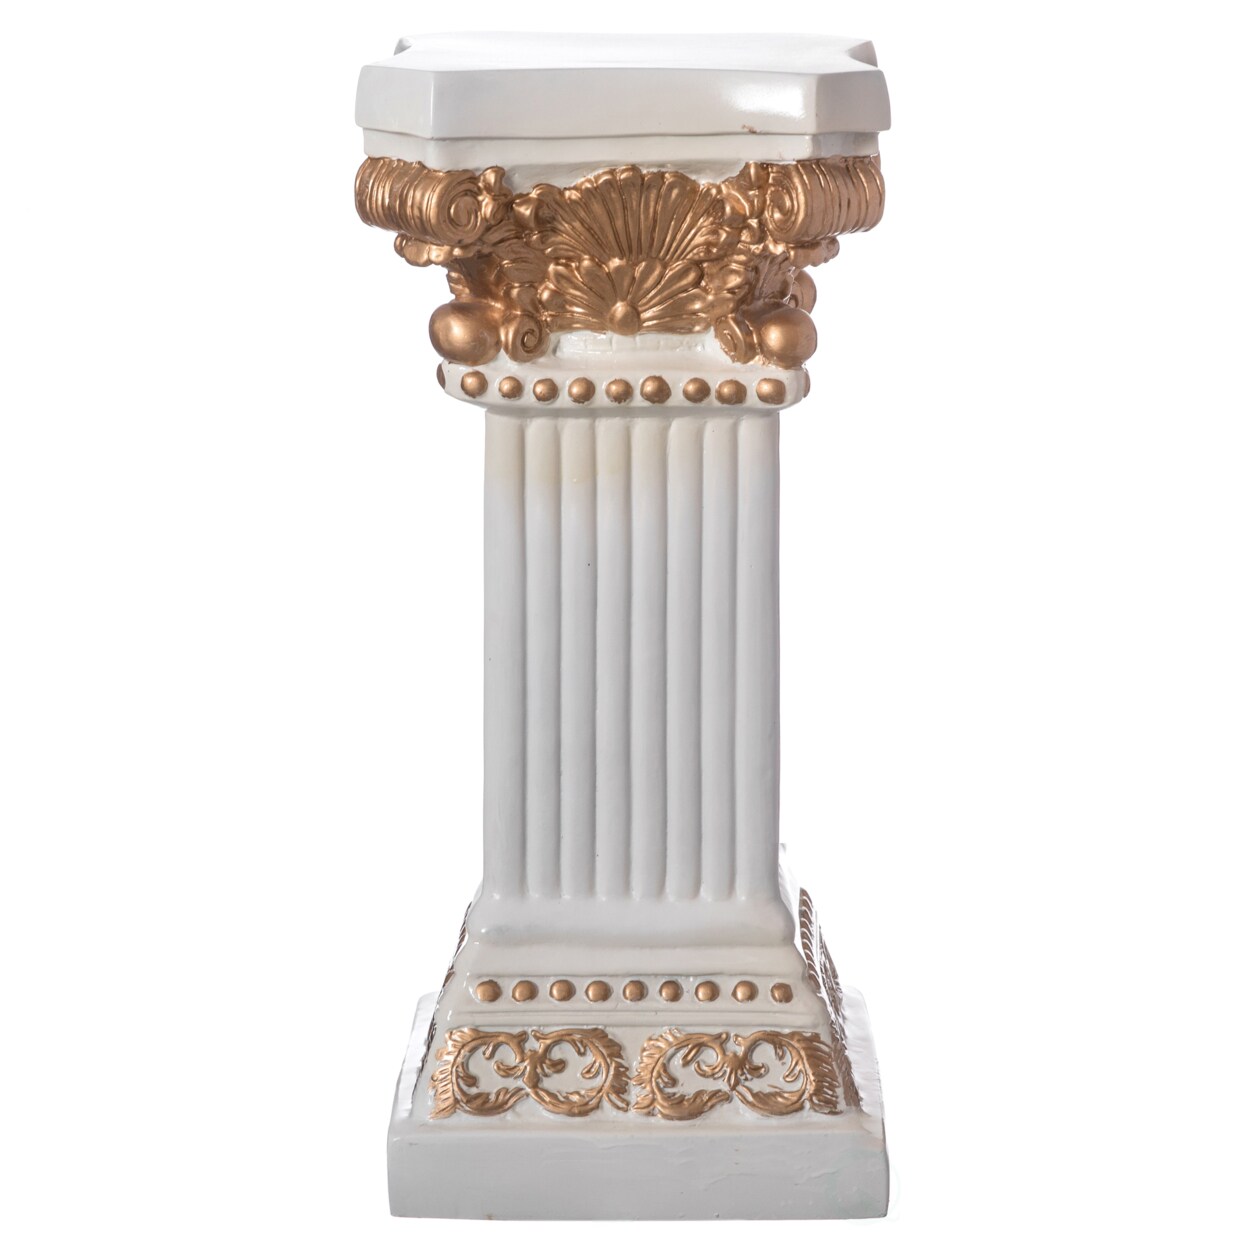 Uniquewise Fiberglass White and Gold Plinth Roman Style Column Ionic Piller Pedestal Vase Stand for Wedding or Party Living Room or